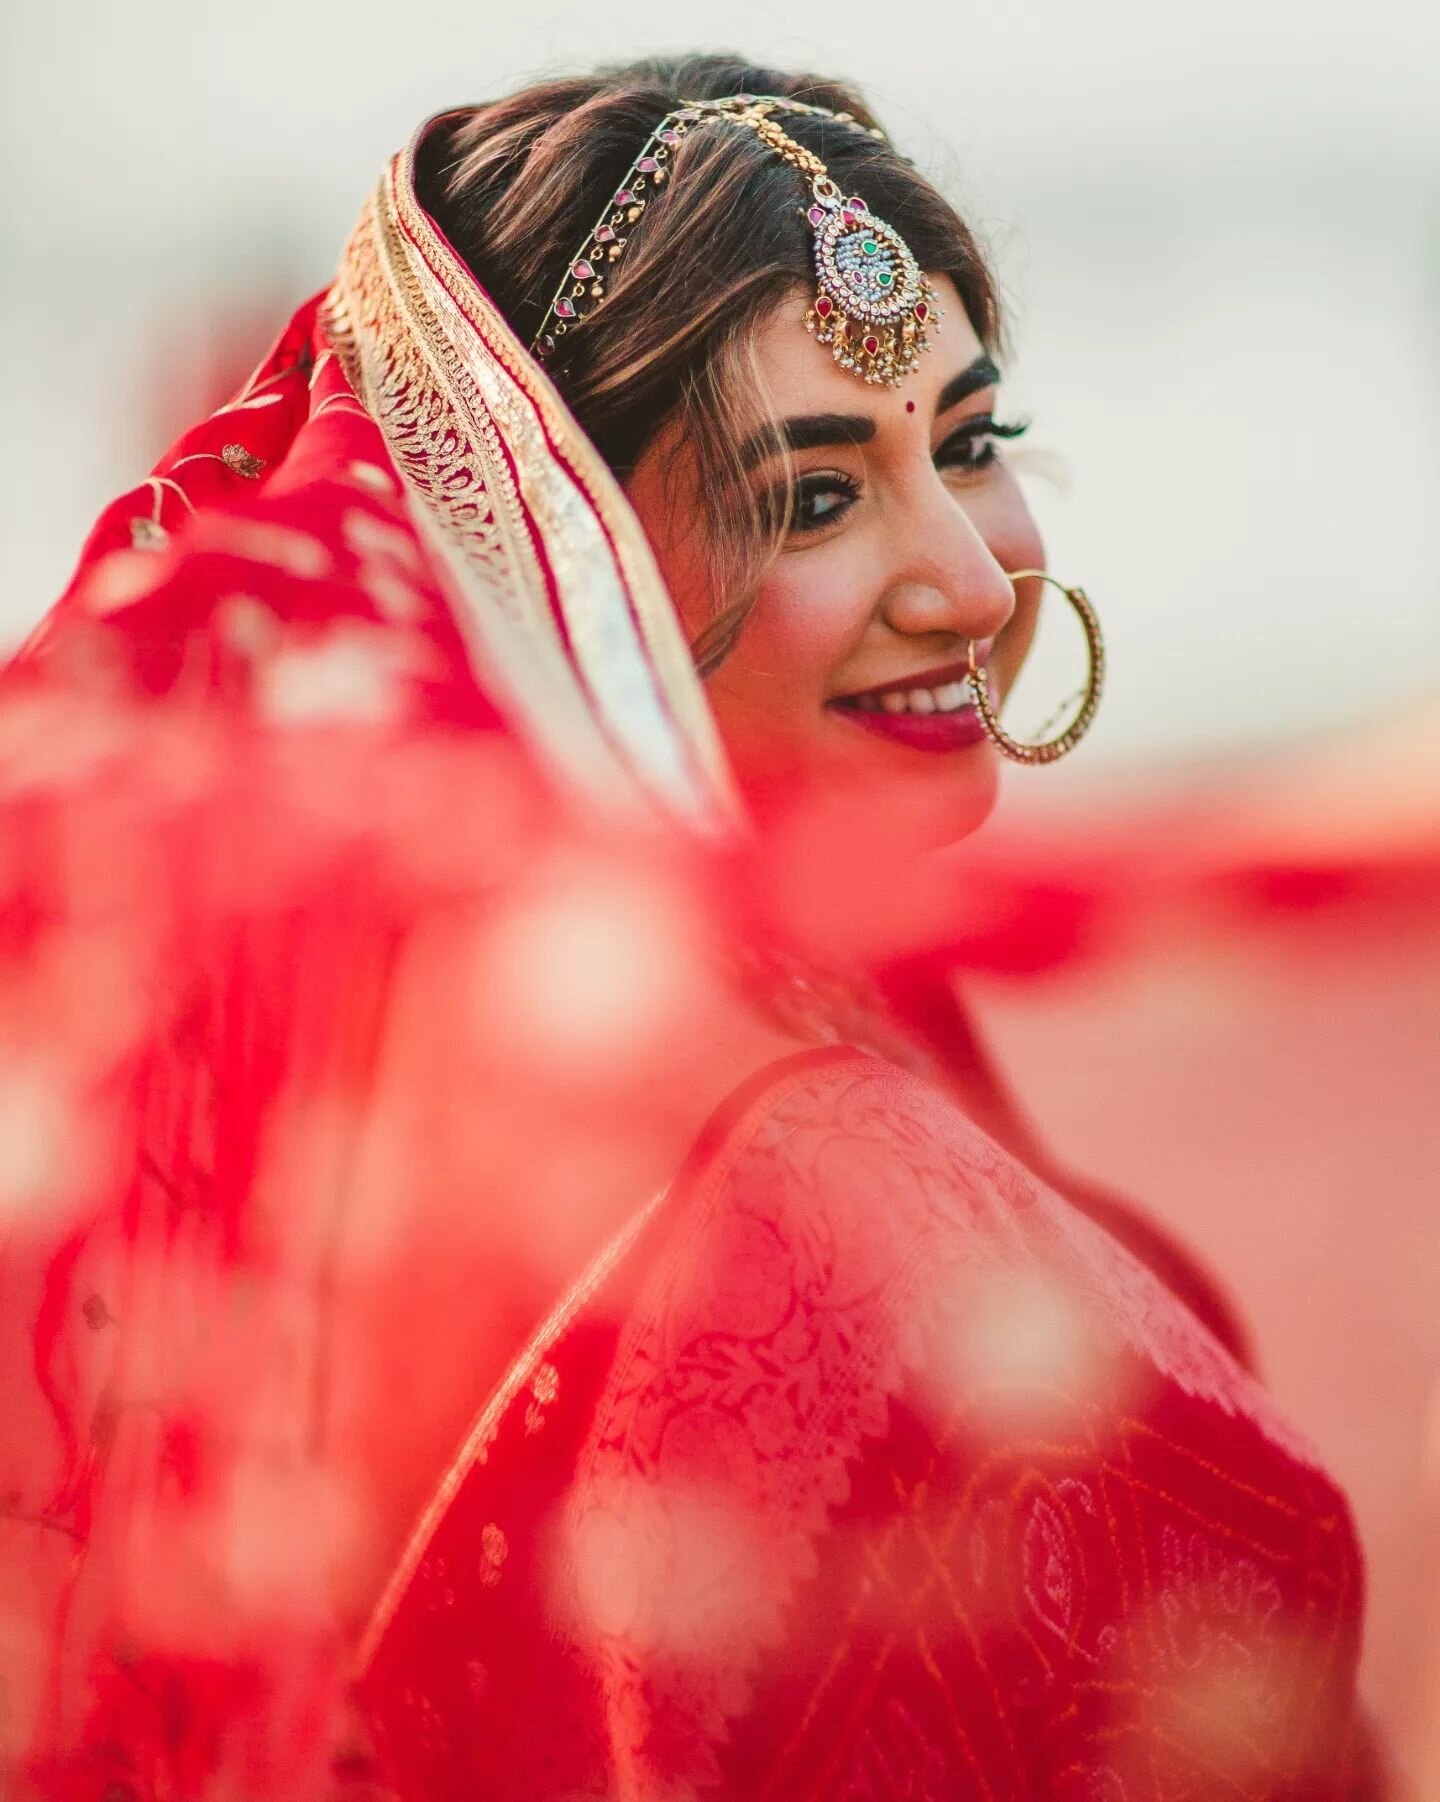 Dressed in her crimson lehenga, Lekhinee was a portrait of grace and poise against the tranquil backdrop of the Bombay beach.

Lekhinee @lekhinee26 co founder of @theindianethnicco custom made her bridal lehenga along with her mother and  founder @he